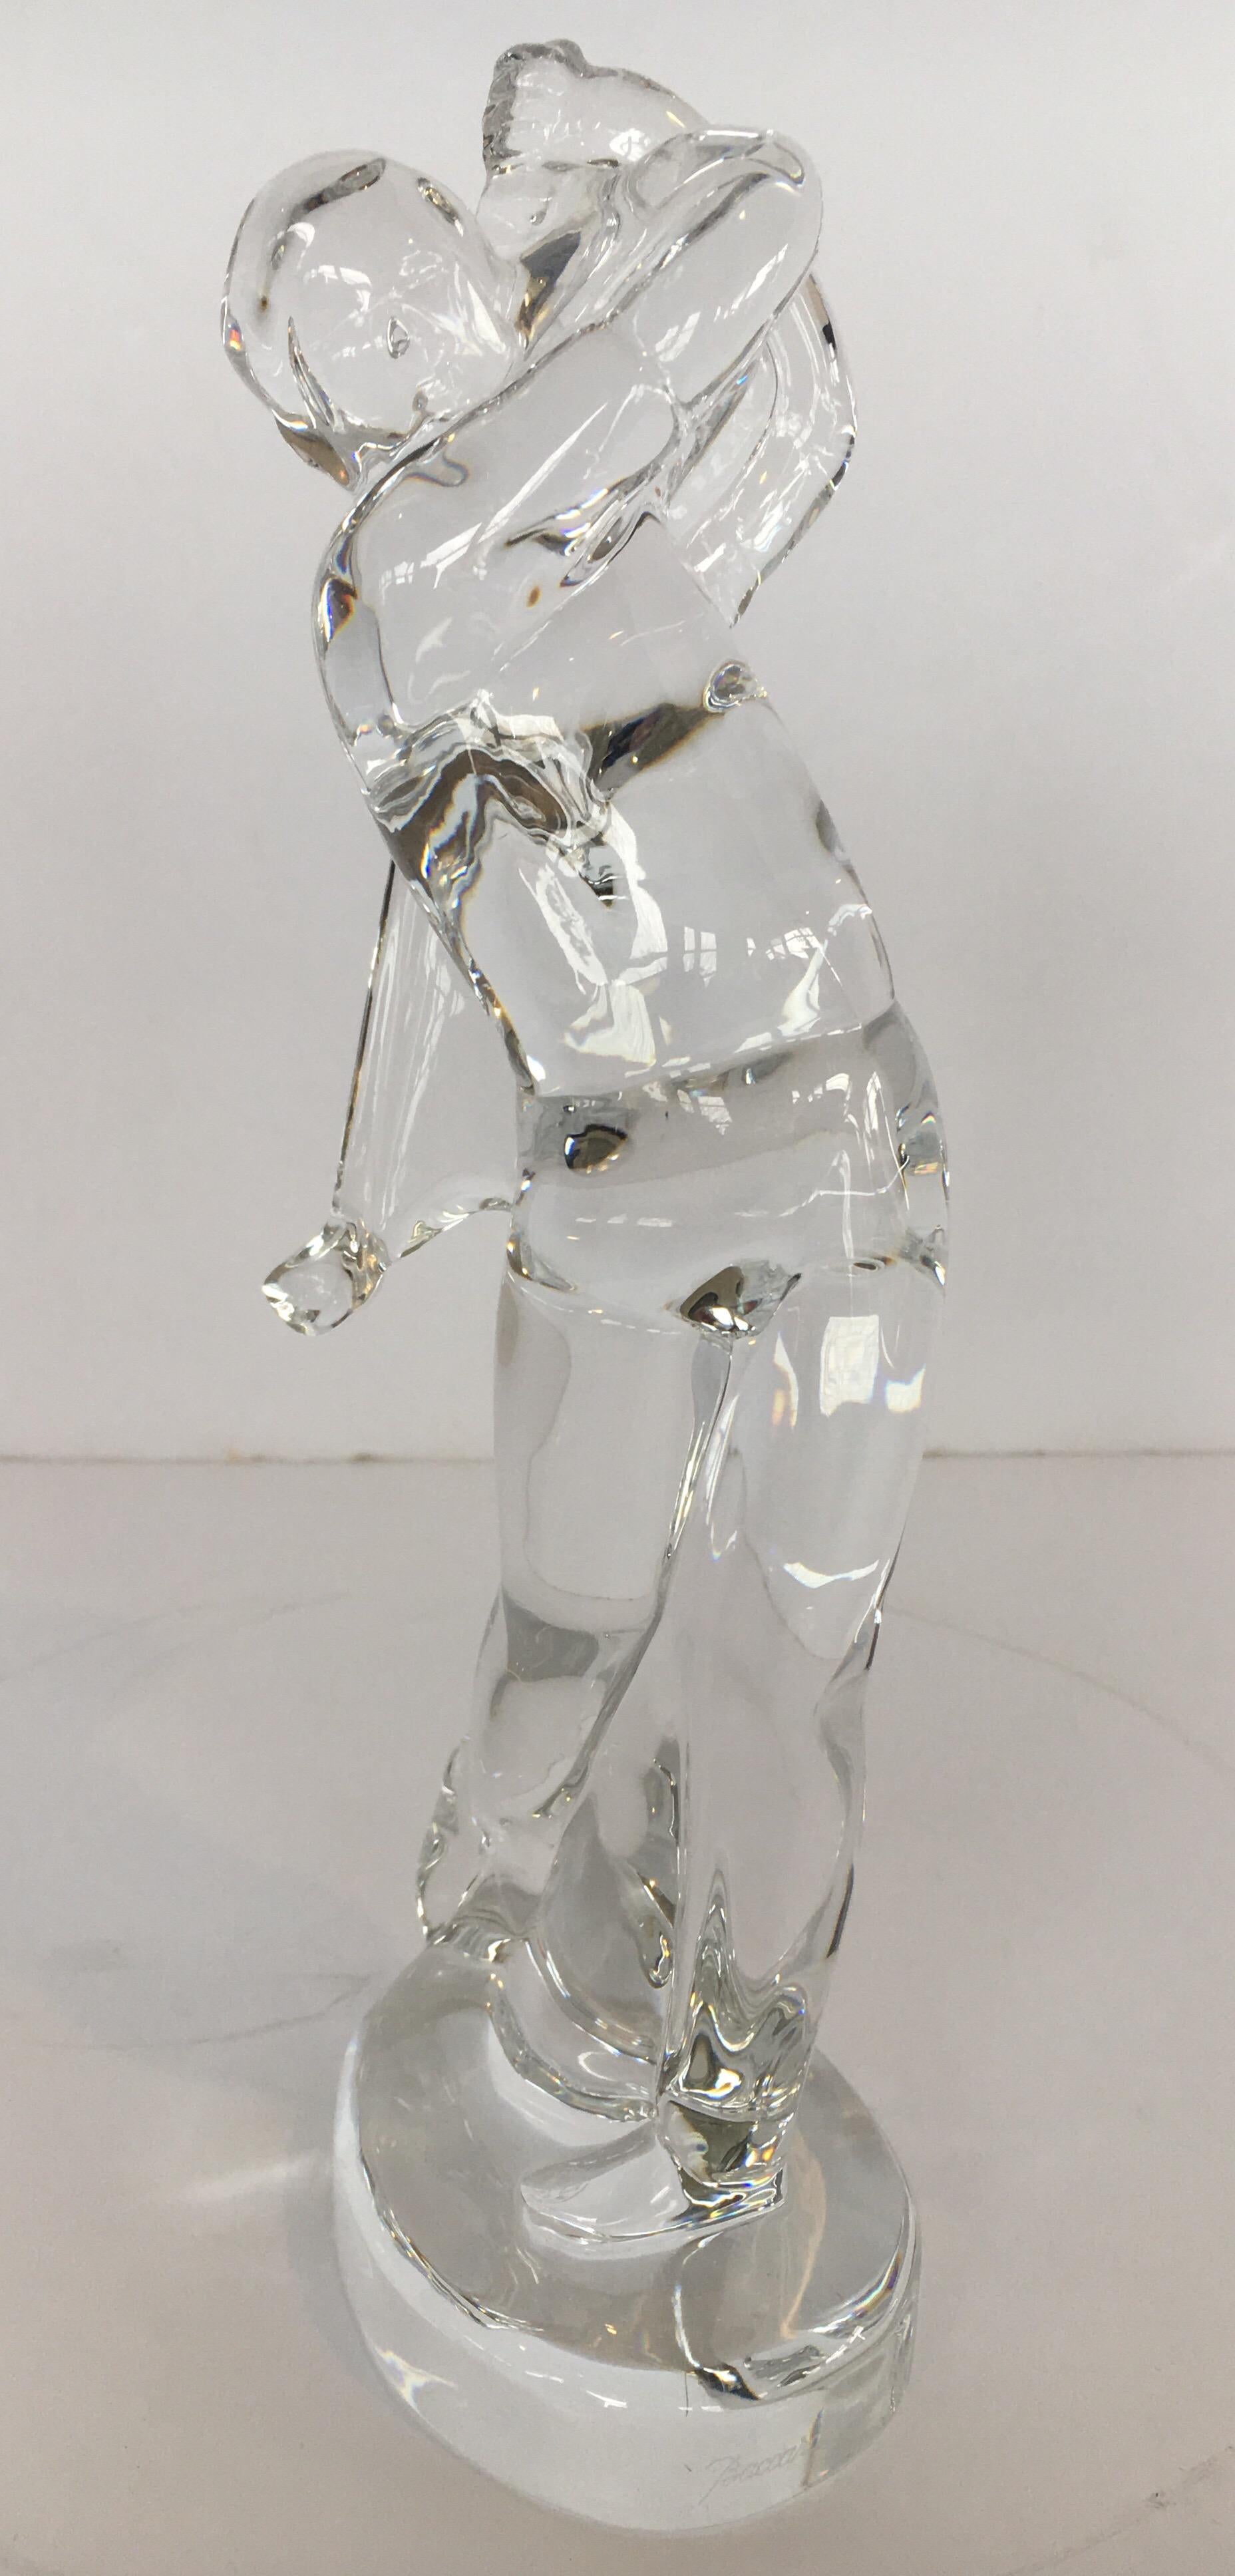 A Baccarat figurine depicting a male golfer swinging. This would be a perfect sculpture for any golf enthusiast, or for a sports lover looking for an elegant glass sculpture to adorn a cocktail table or office desk. Inscribed 